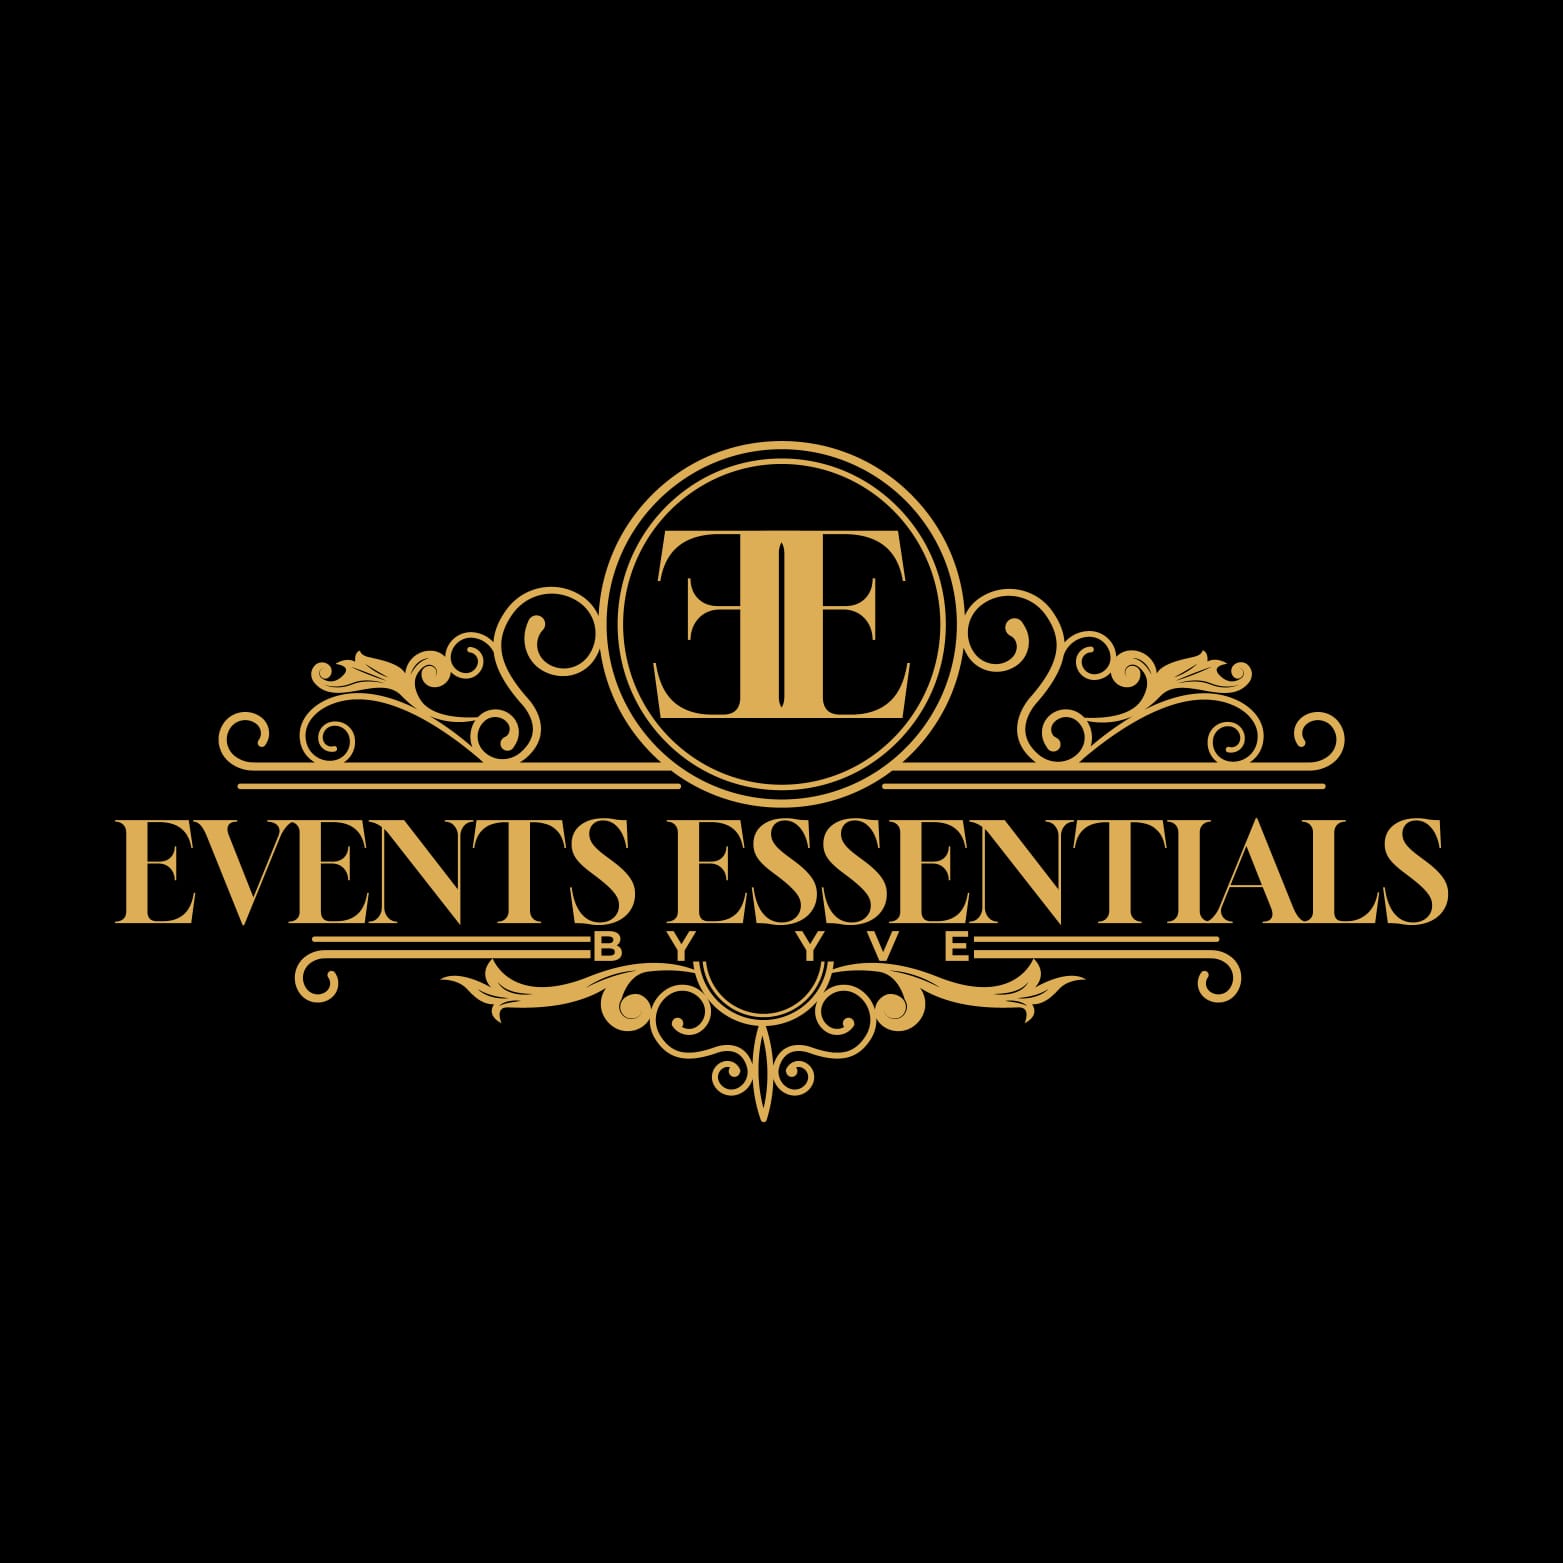 Event Essentials by Yve